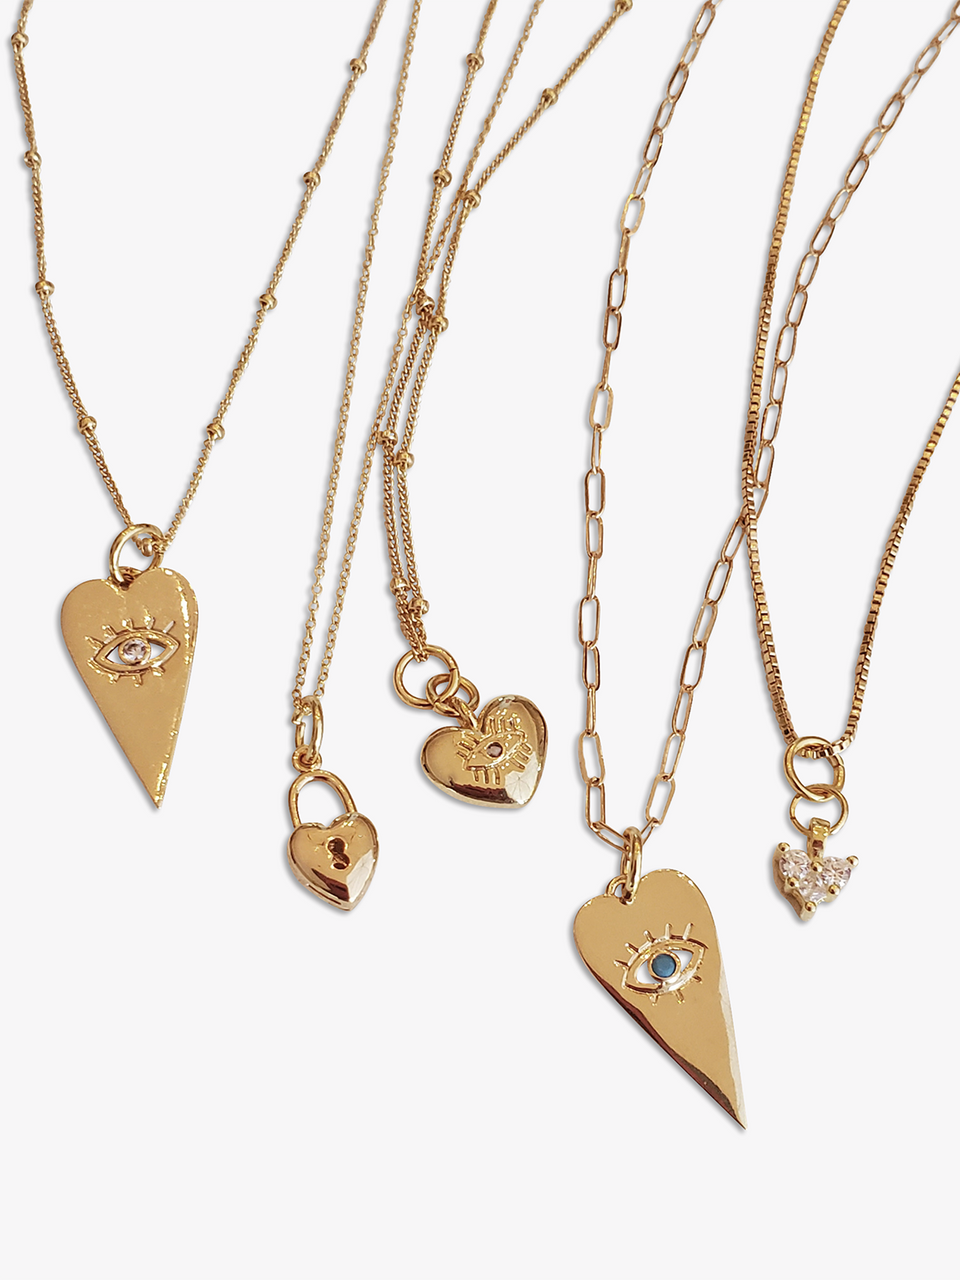 14k Gold Filled Necklace With Dainty Heart Pendant, 5 Styles